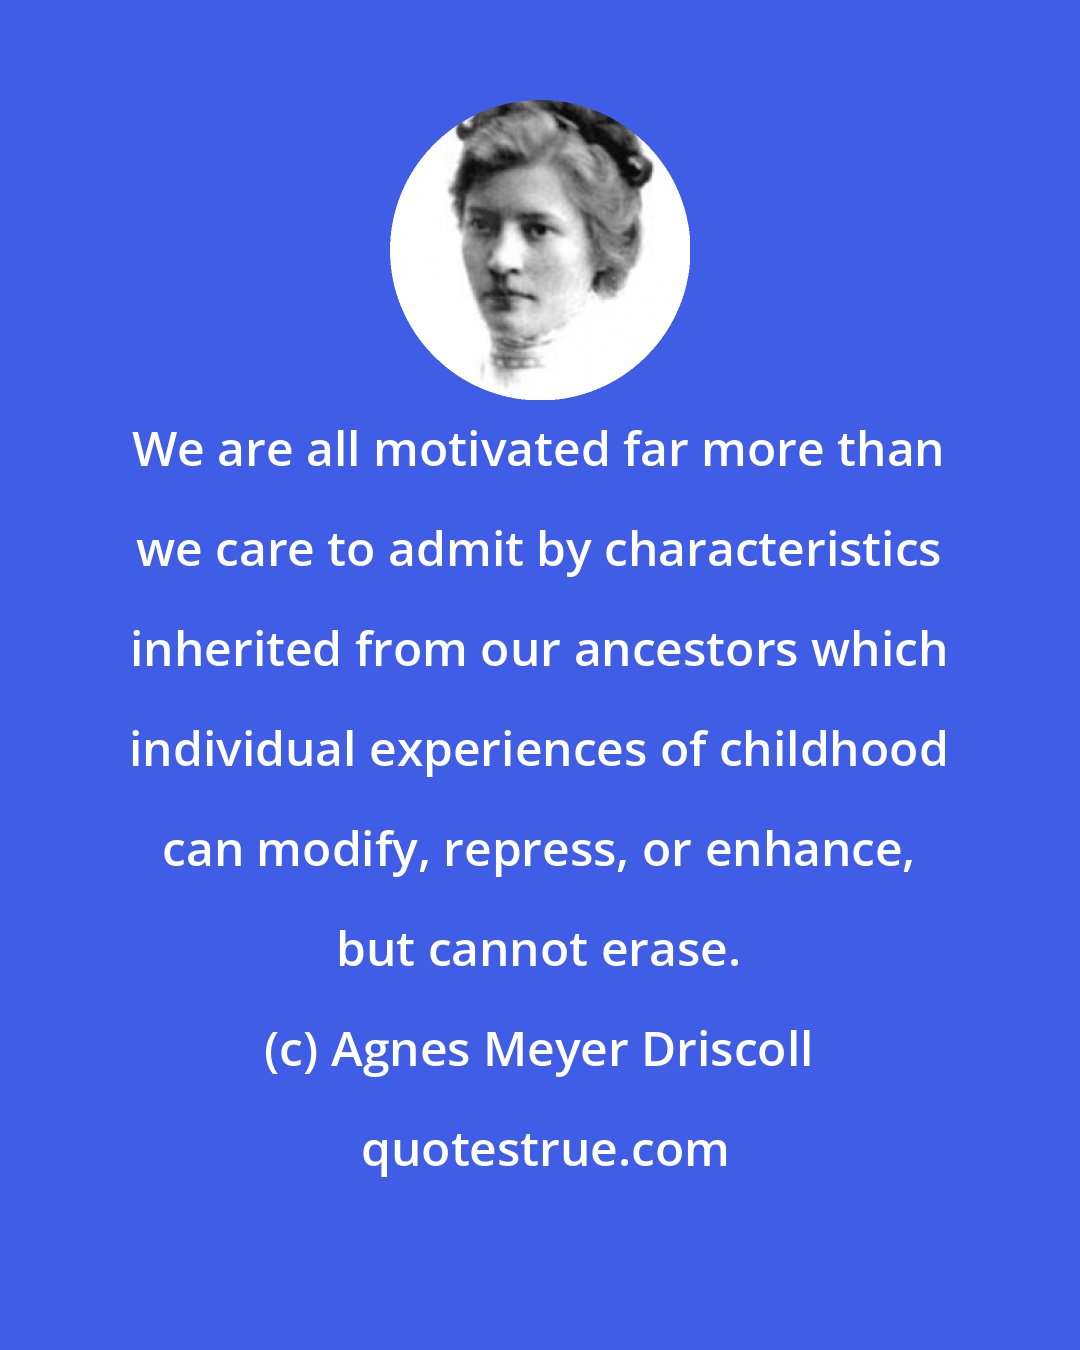 Agnes Meyer Driscoll: We are all motivated far more than we care to admit by characteristics inherited from our ancestors which individual experiences of childhood can modify, repress, or enhance, but cannot erase.